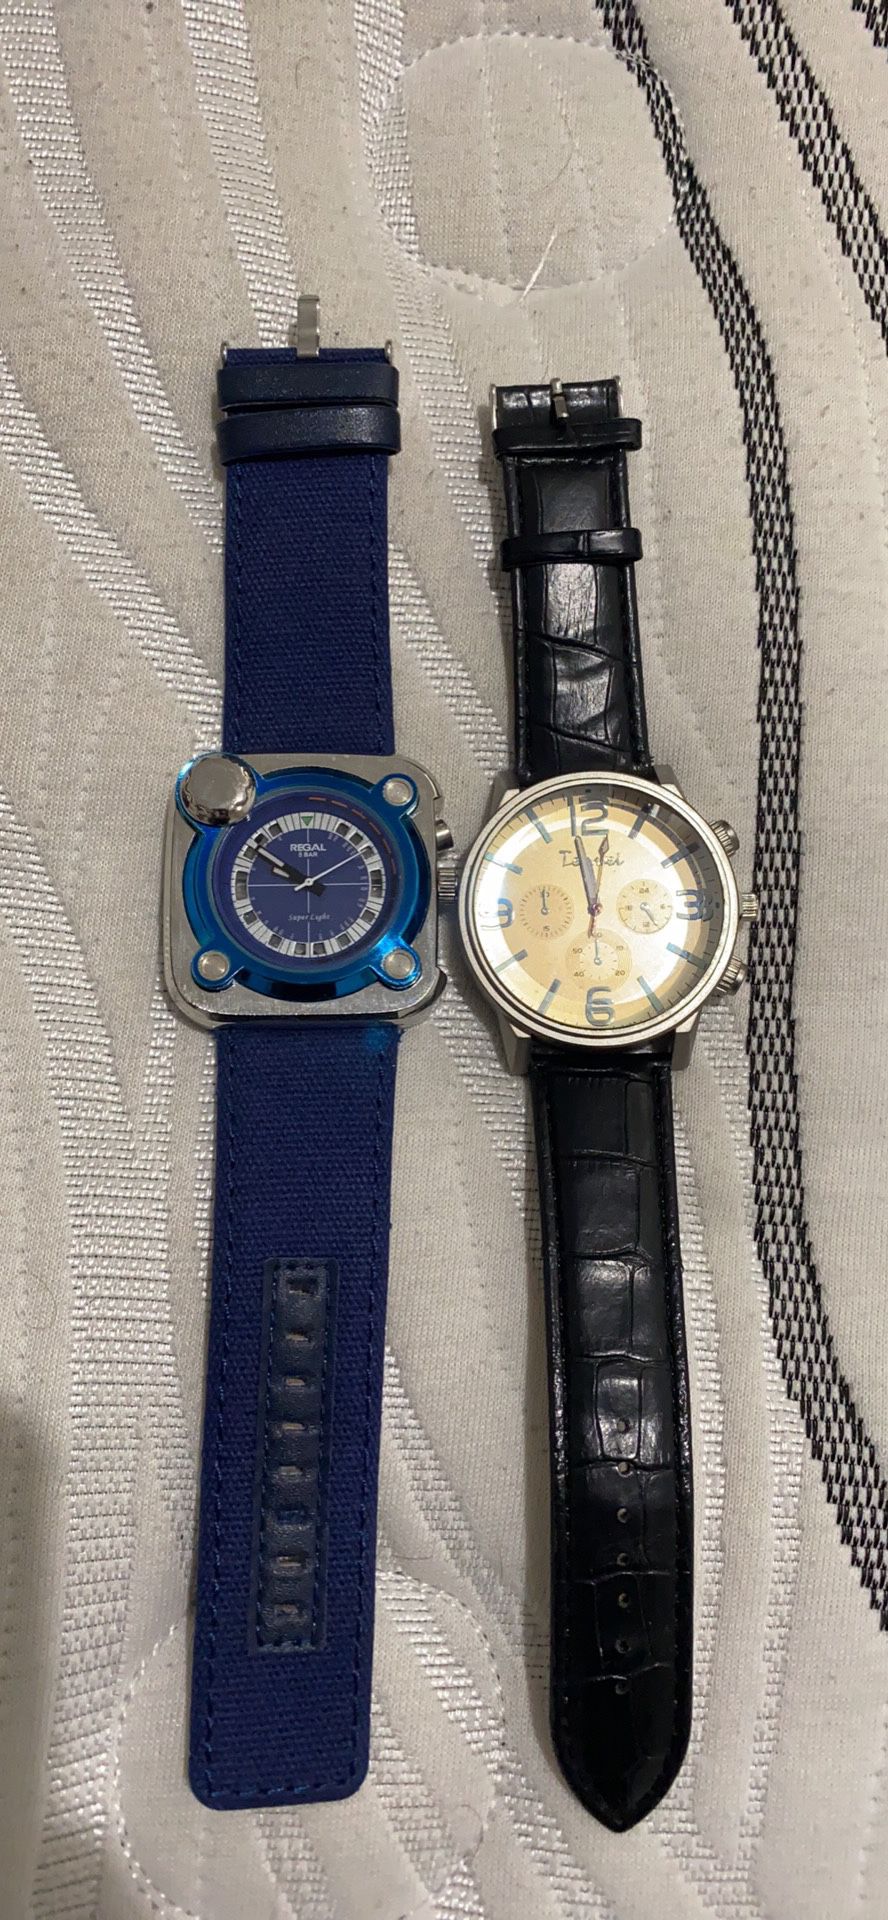 Old School Watches